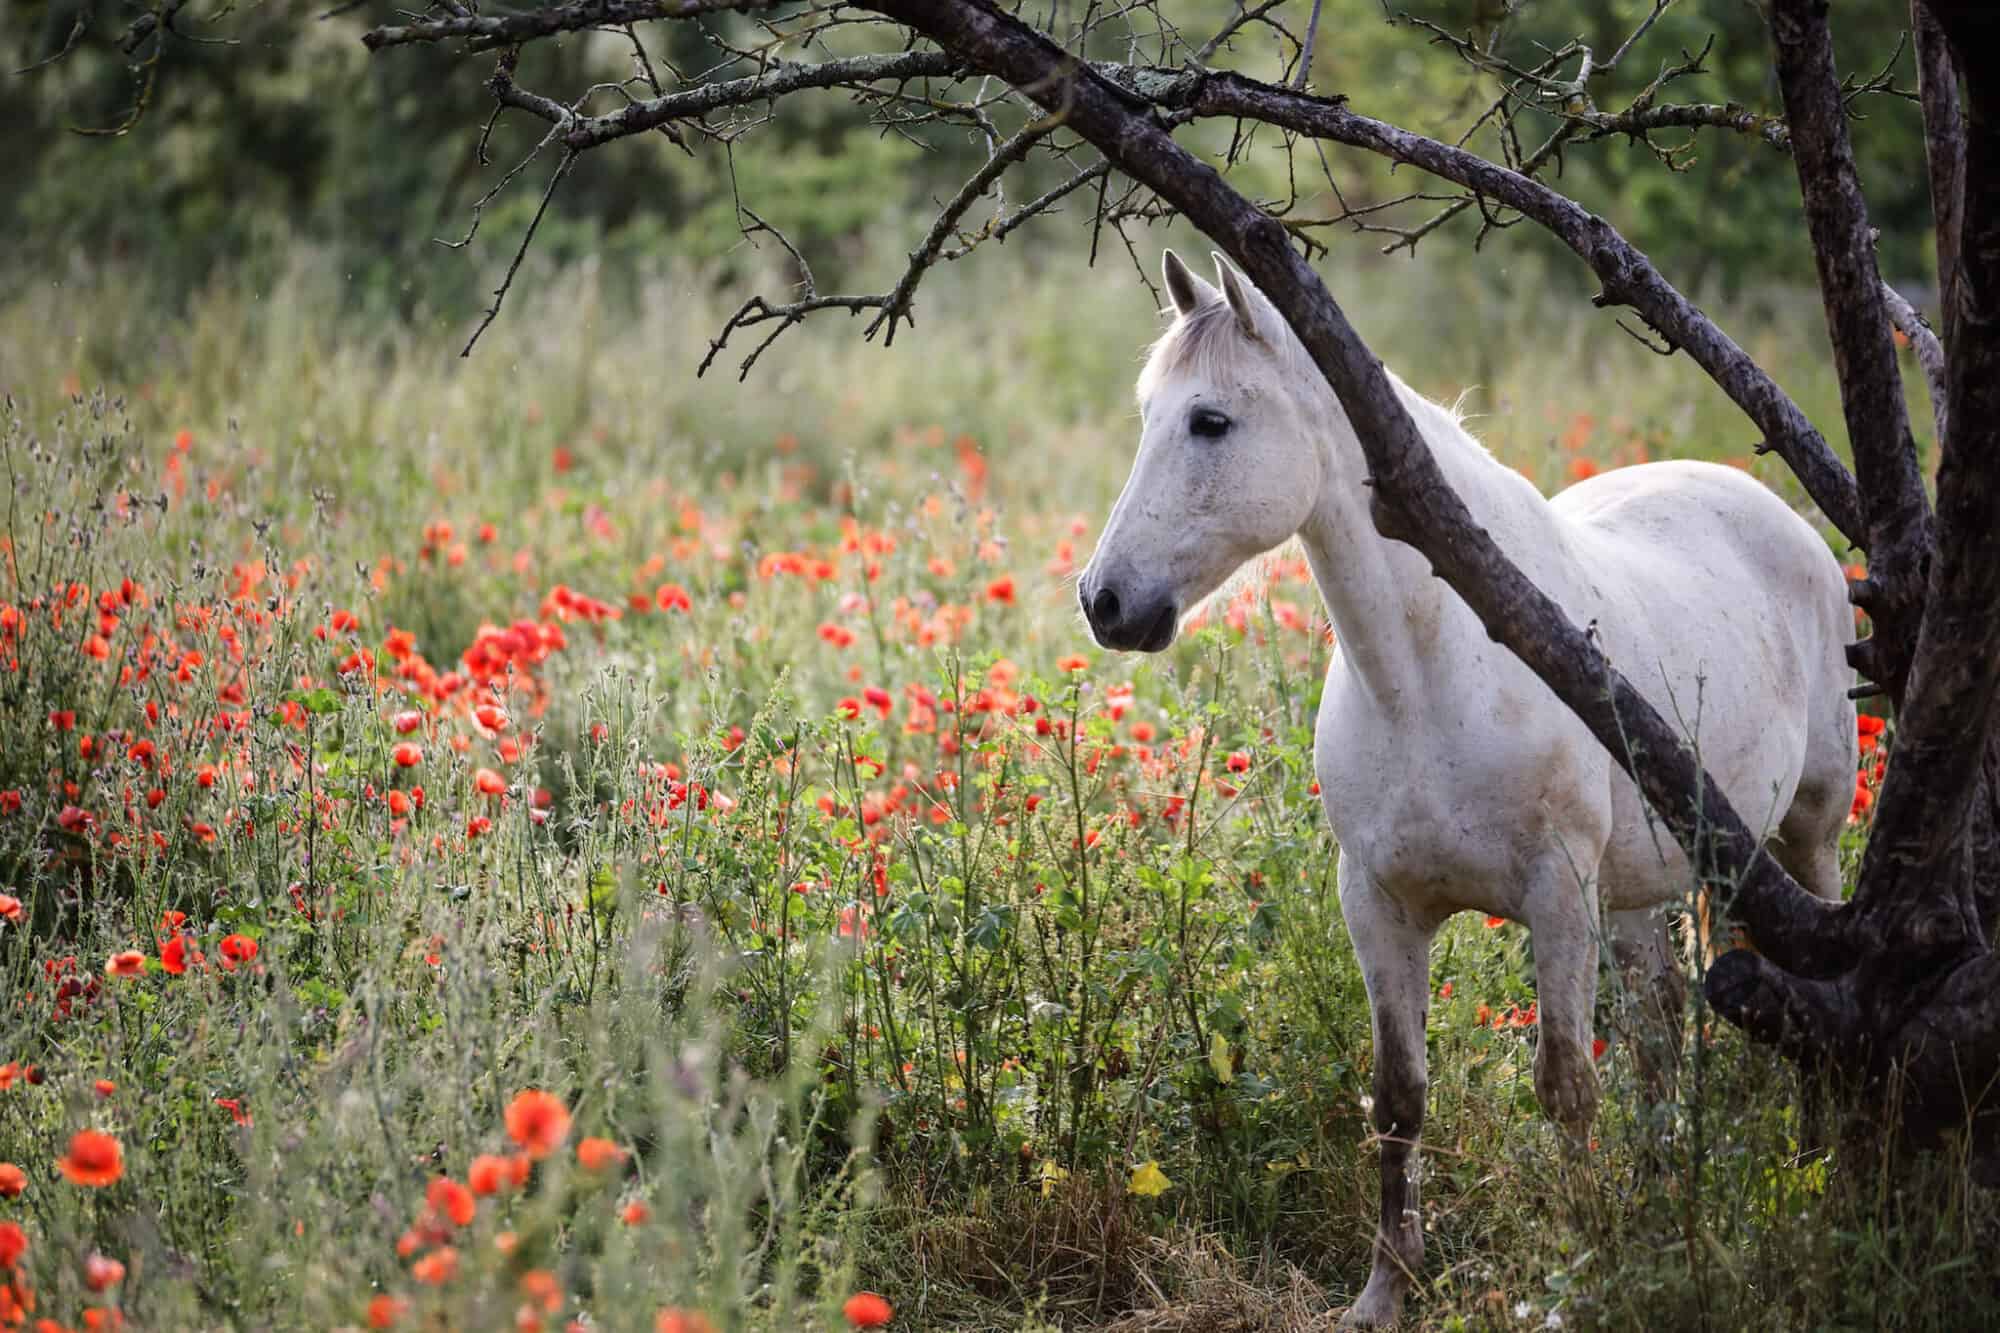 A beautiful white horse, native to the area, stands in a field of flowers in Camargue.